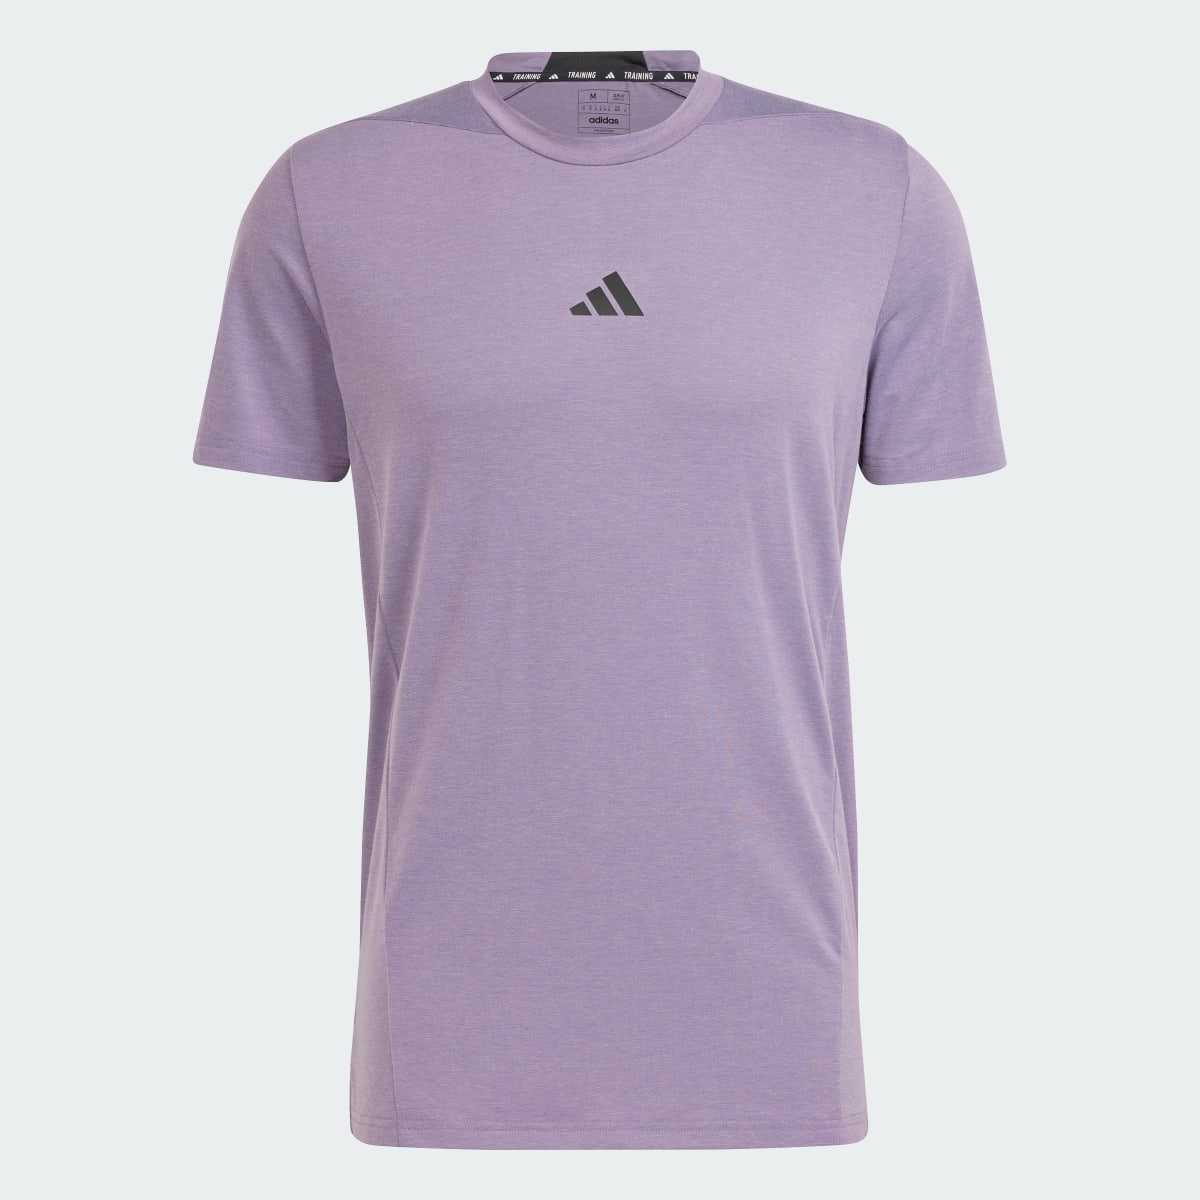 Adidas Designed for Training Workout Tee. 5